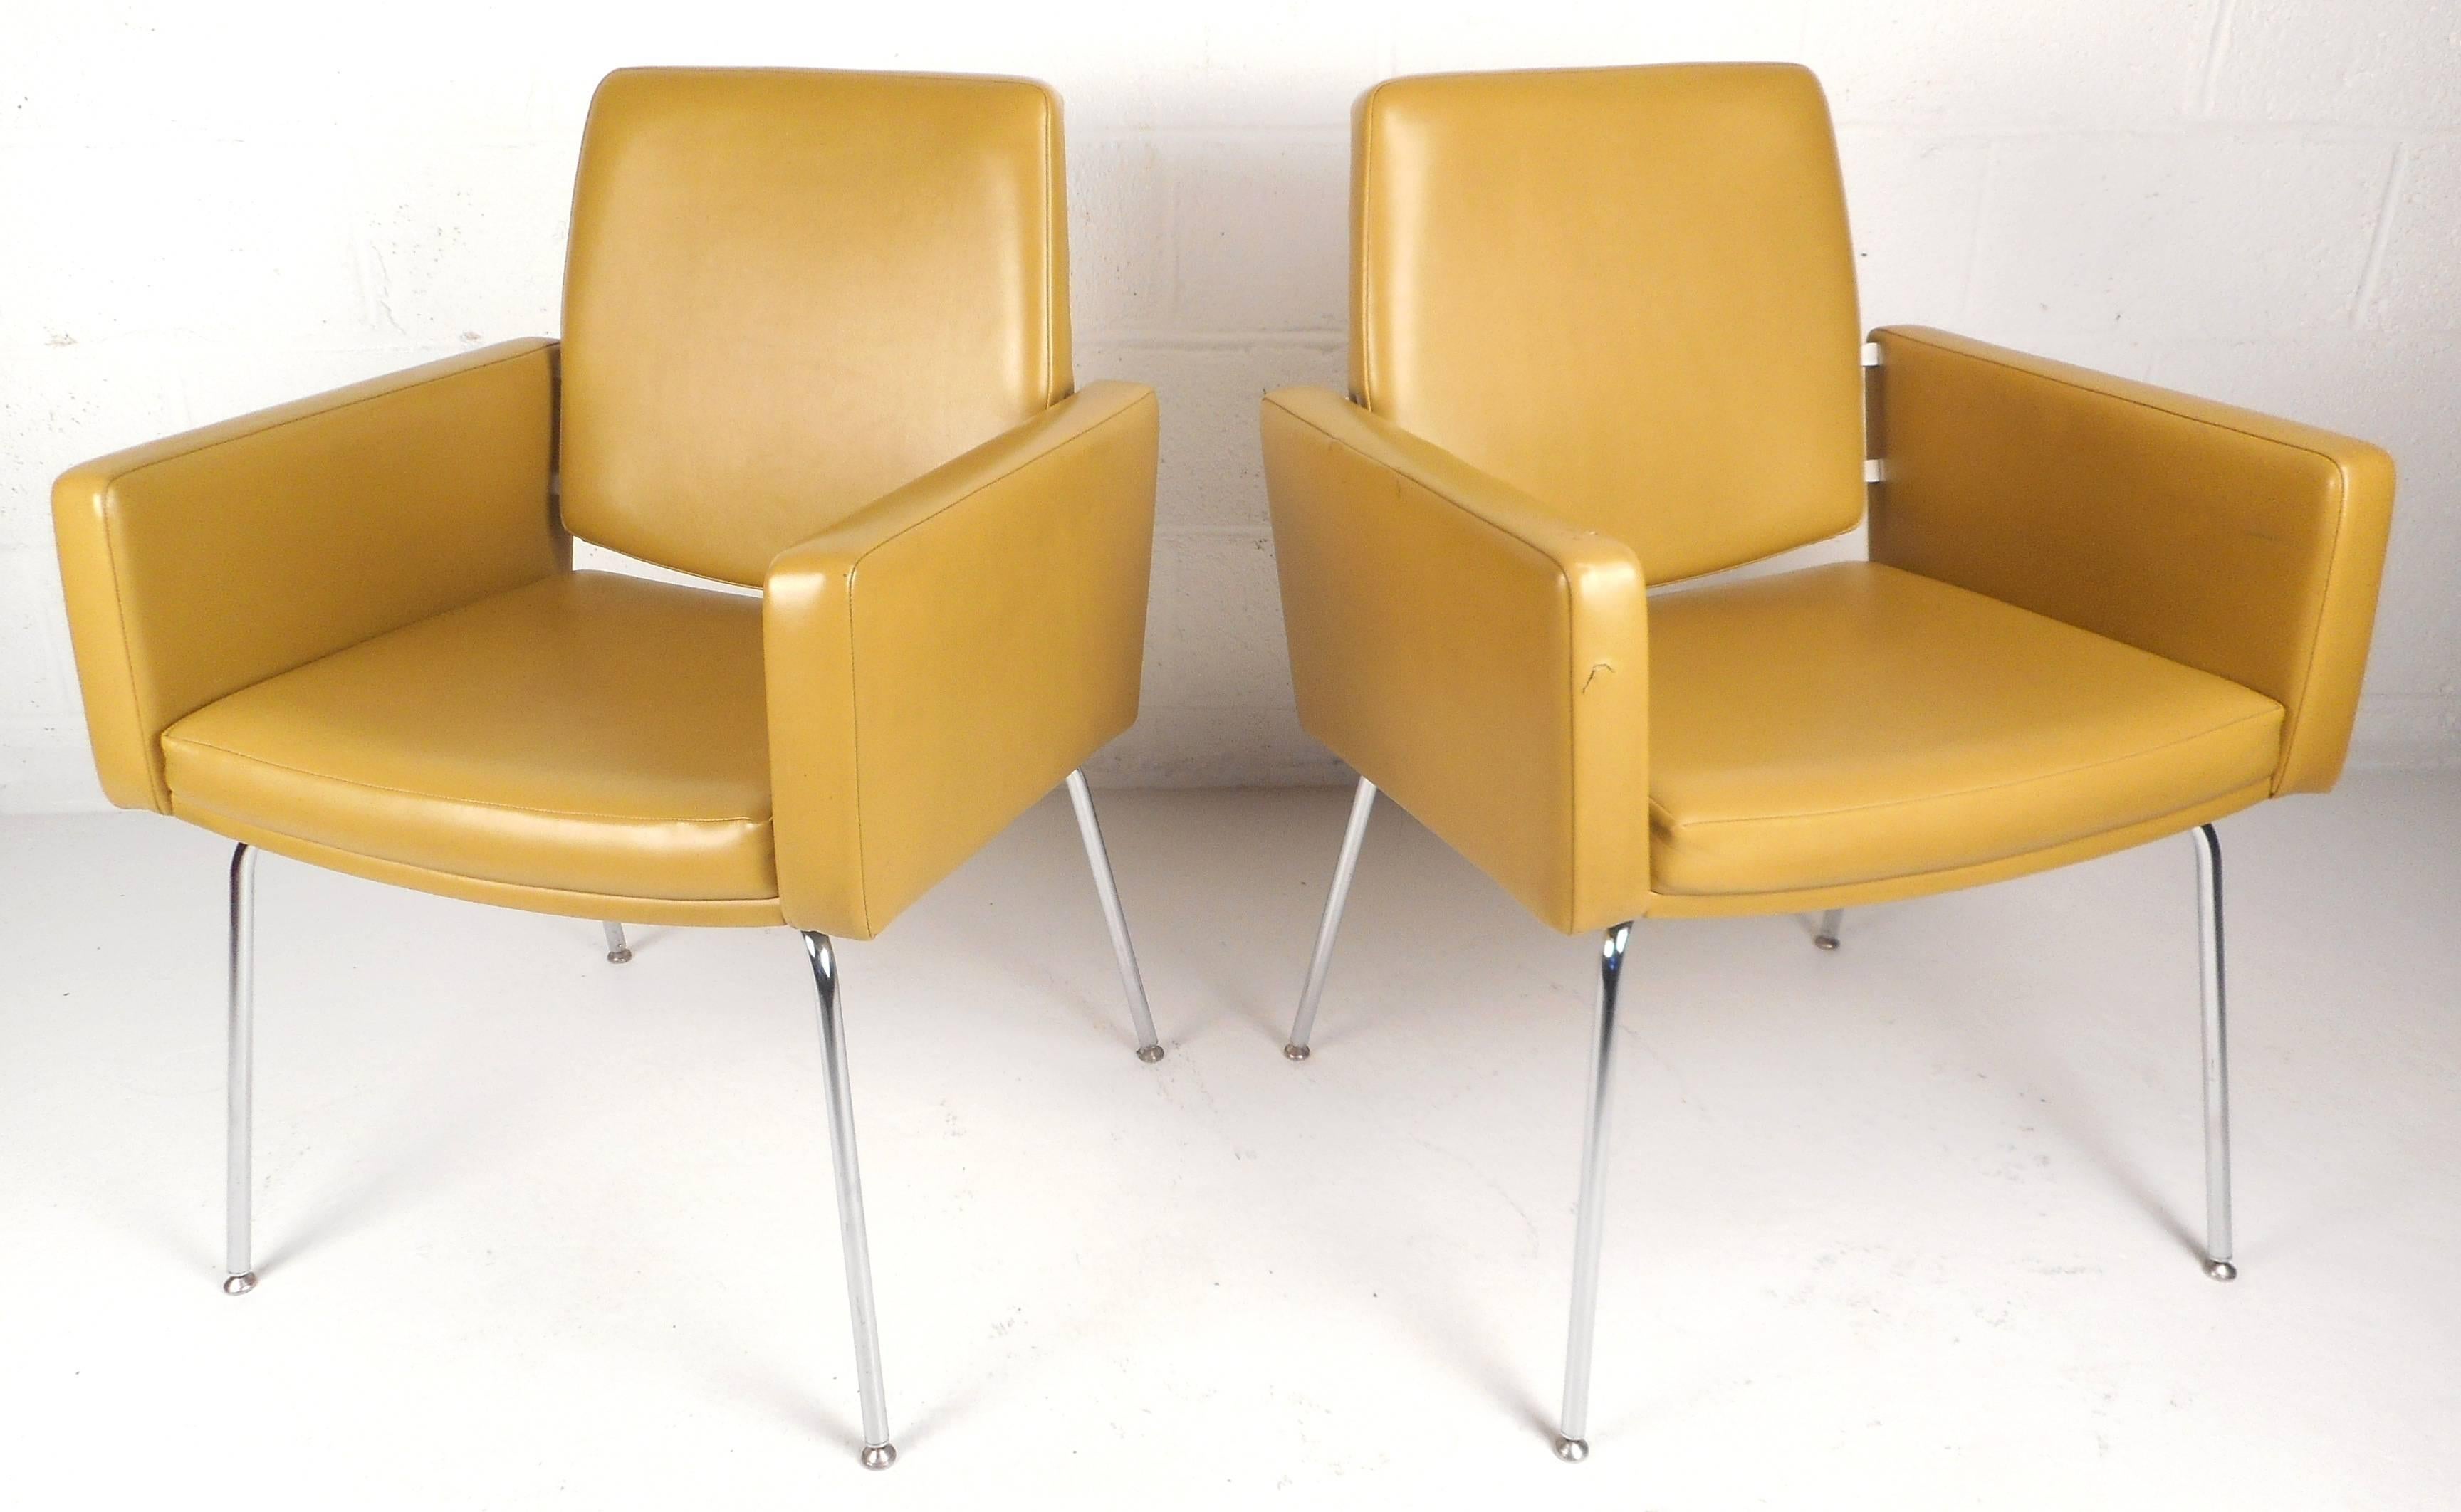 Stunning pair of vintage modern lounge chairs feature vinyl upholstery and unique bent rod chrome legs. The stylish floating backrest and thick padded seating offer comfort in any modern interior without sacrificing style. Please confirm item